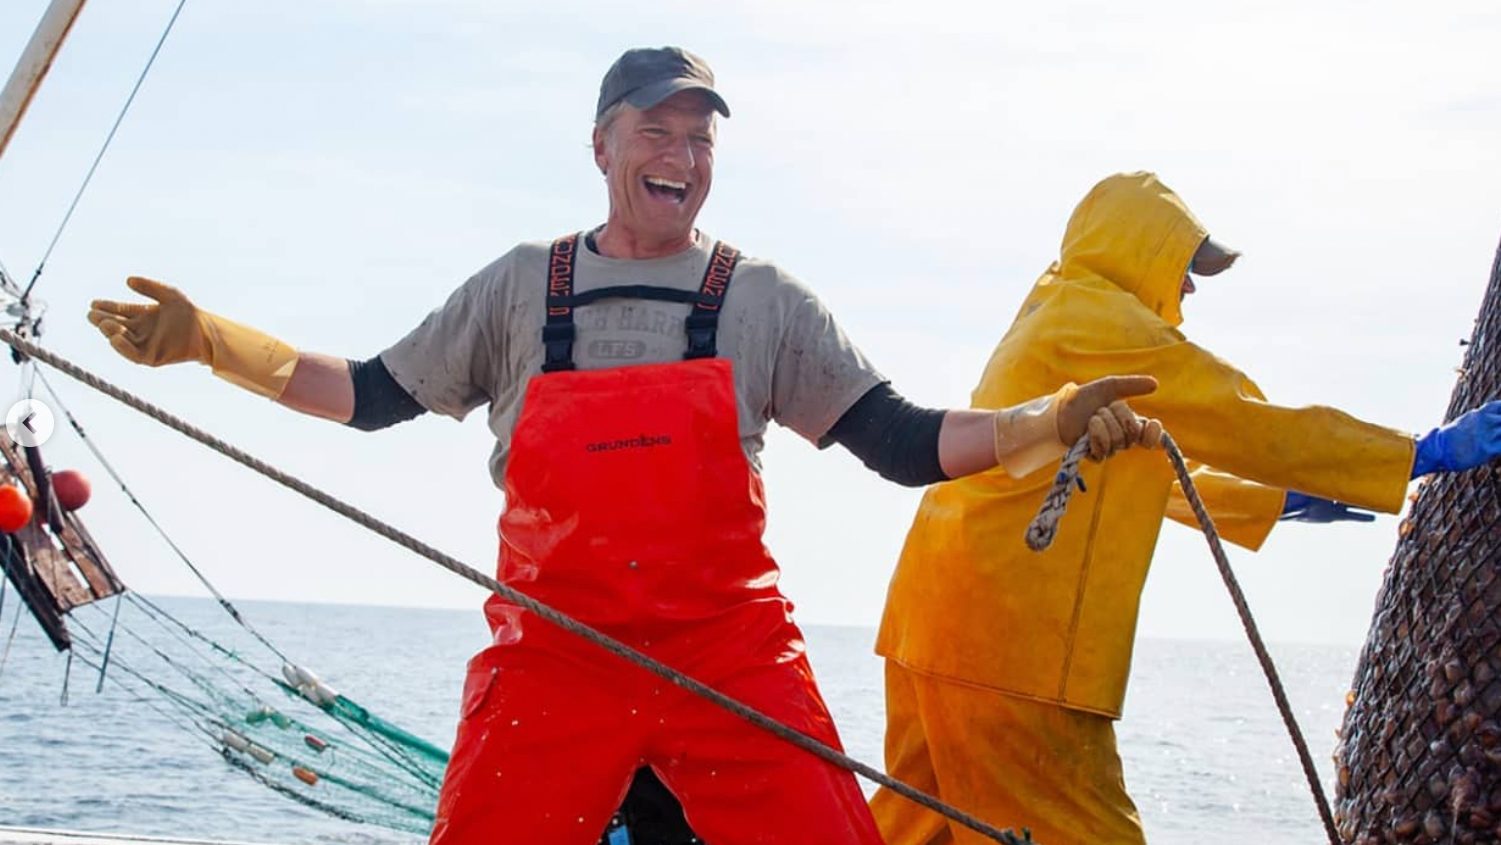 DEADLIEST CATCH's Mike Rowe Recalls Dangerous Time Spent With Fishing Crew